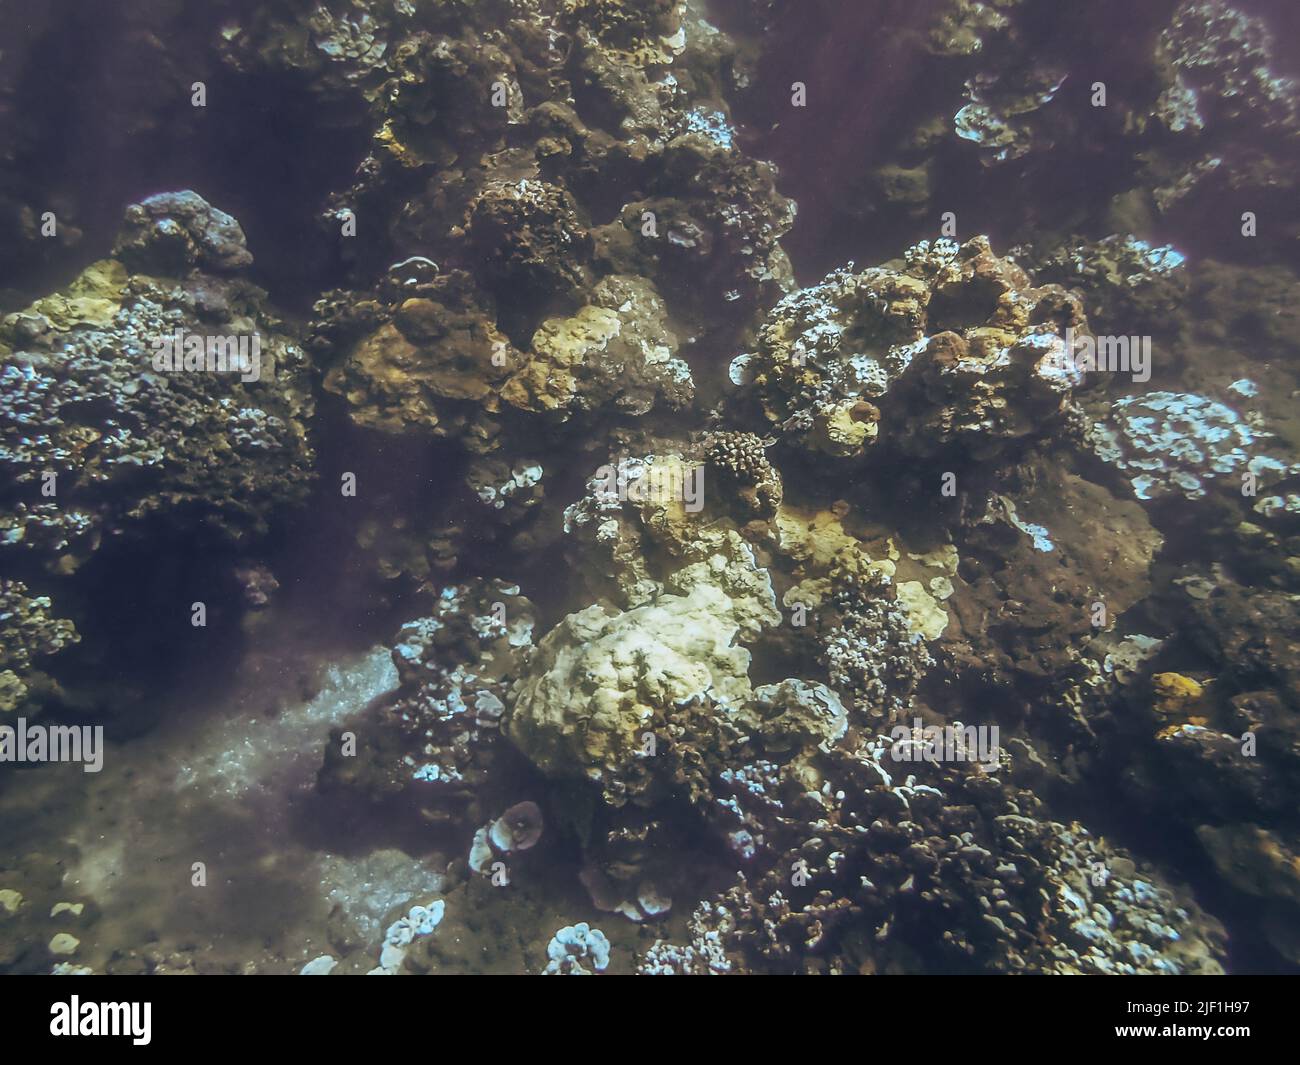 Underwater image of Pacific ocean water and the coral reef taken in Maui Hawaii. Stock Photo